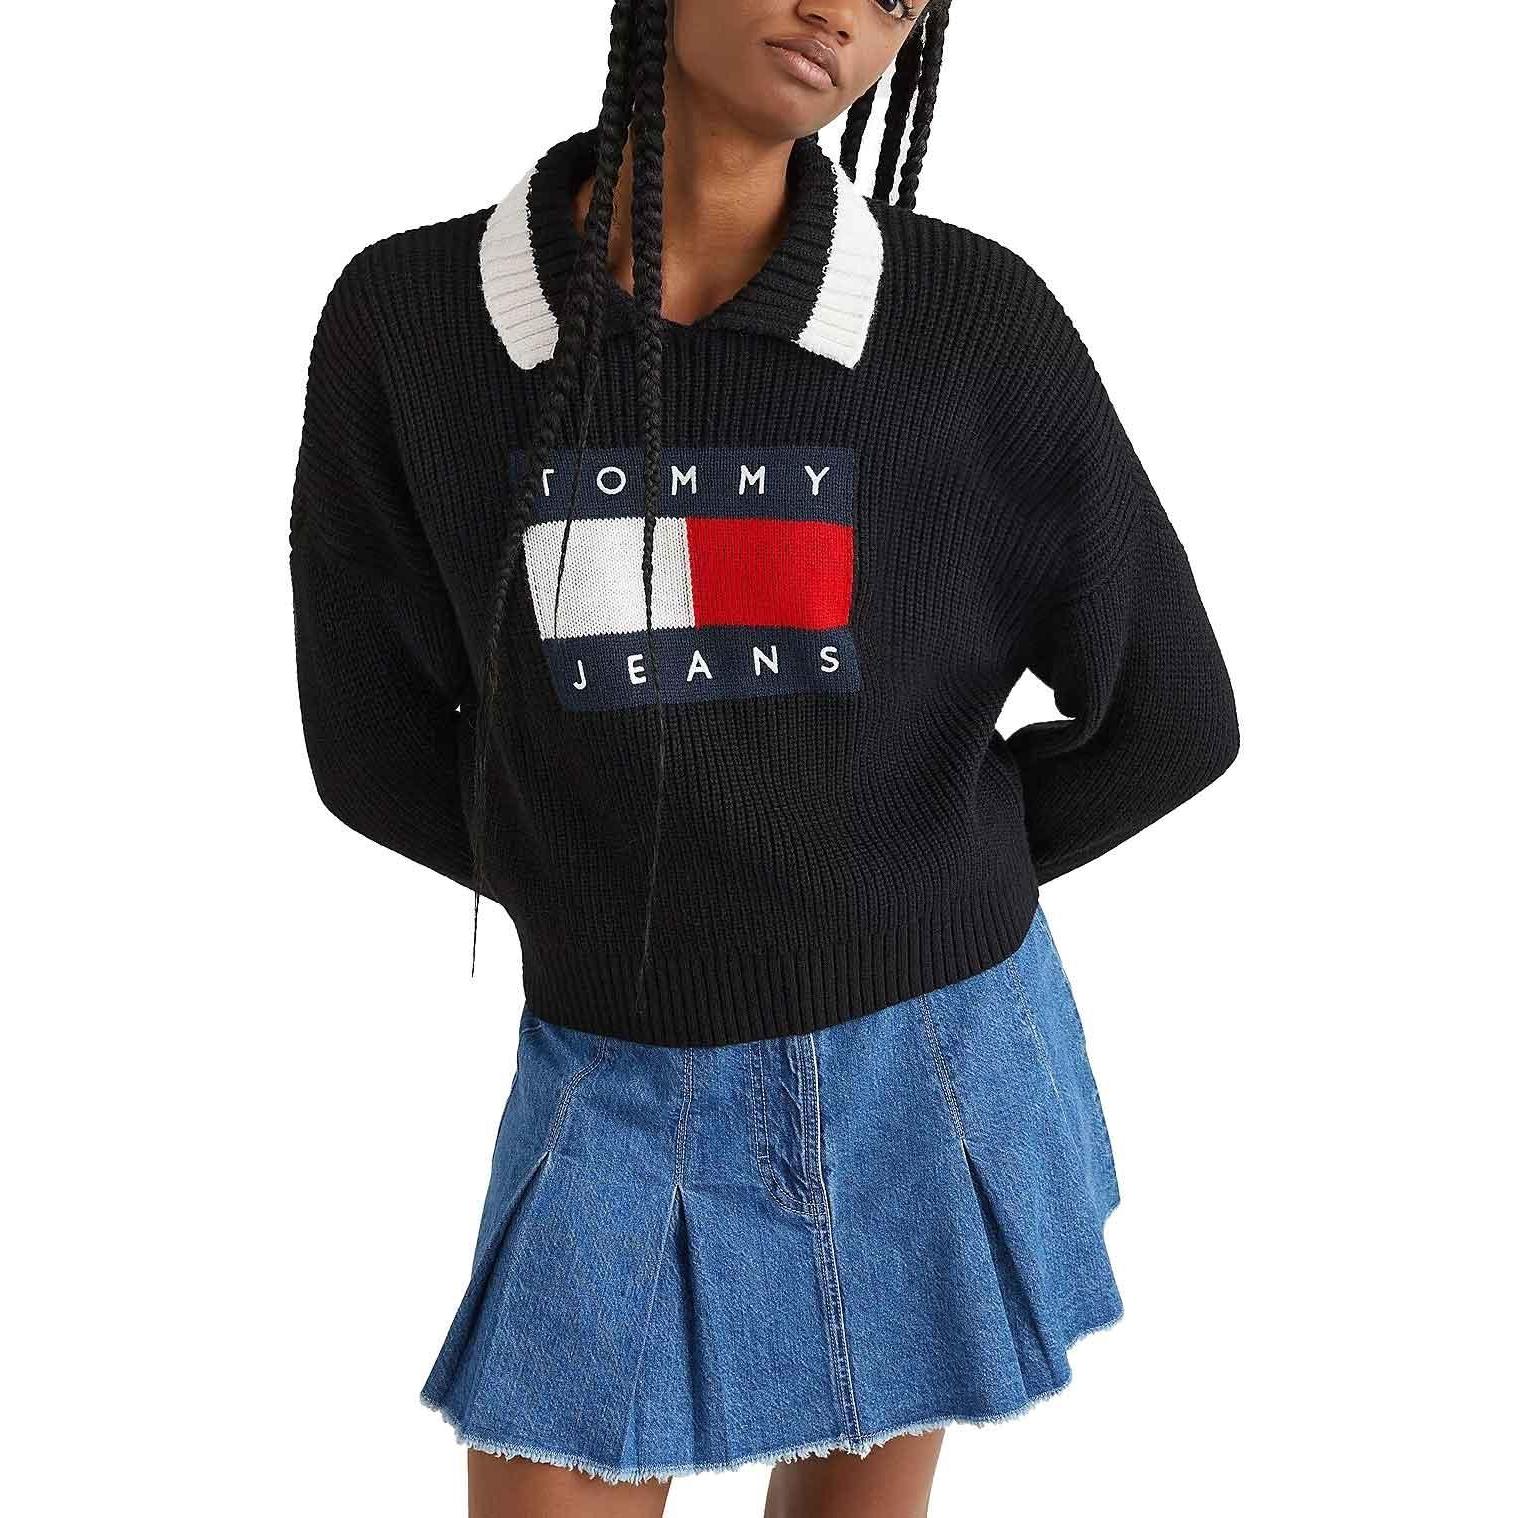 Tommy Jeans - Jersey Tommy Jeans Cuello Solapa para Mujer Negra